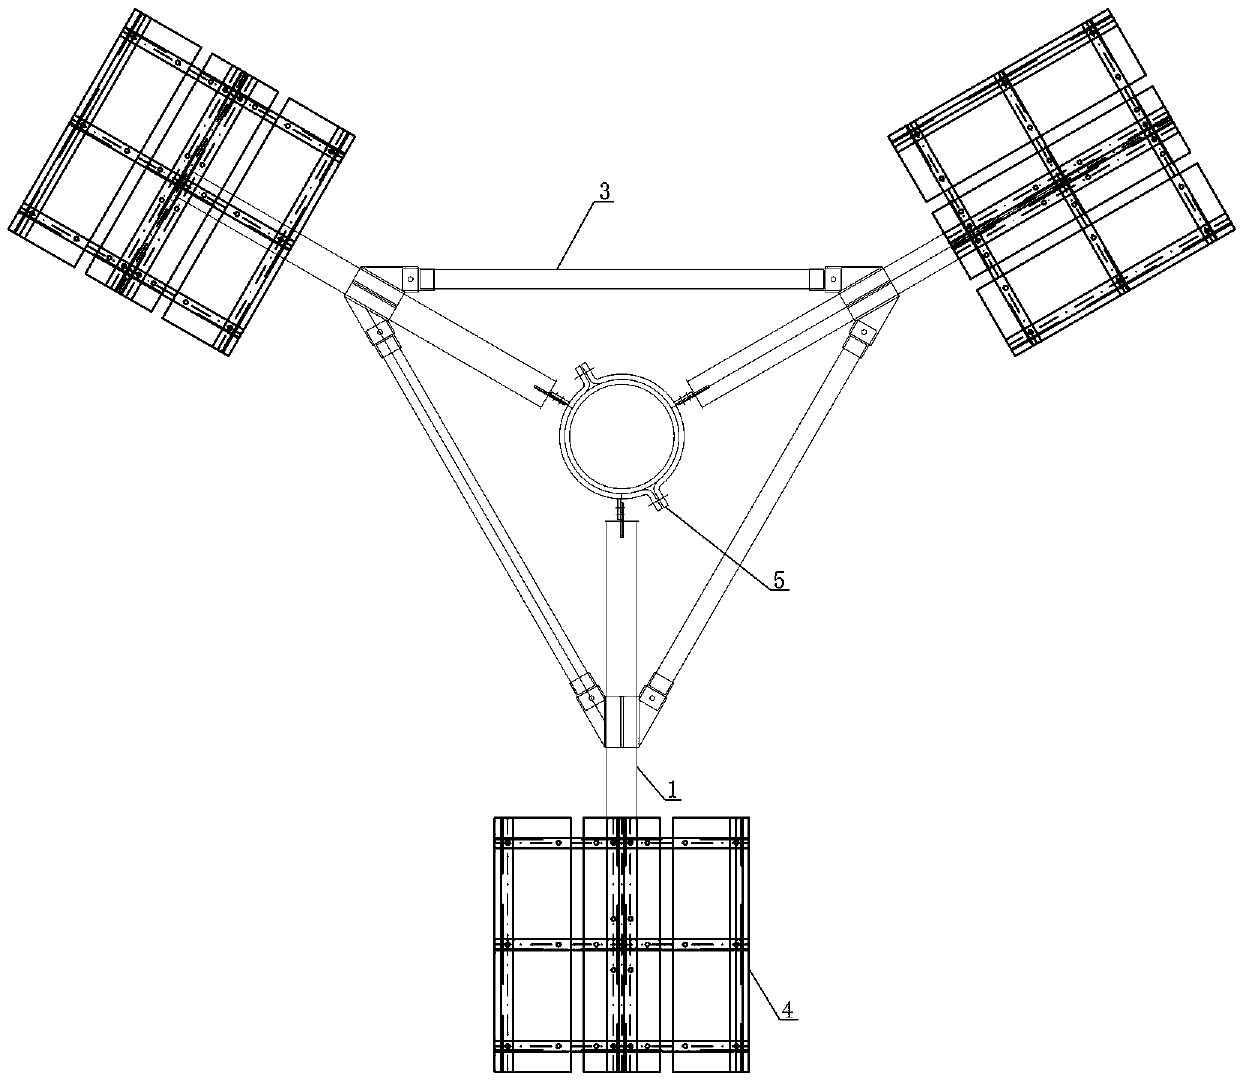 Reinforcing structure for single-tube communication tower